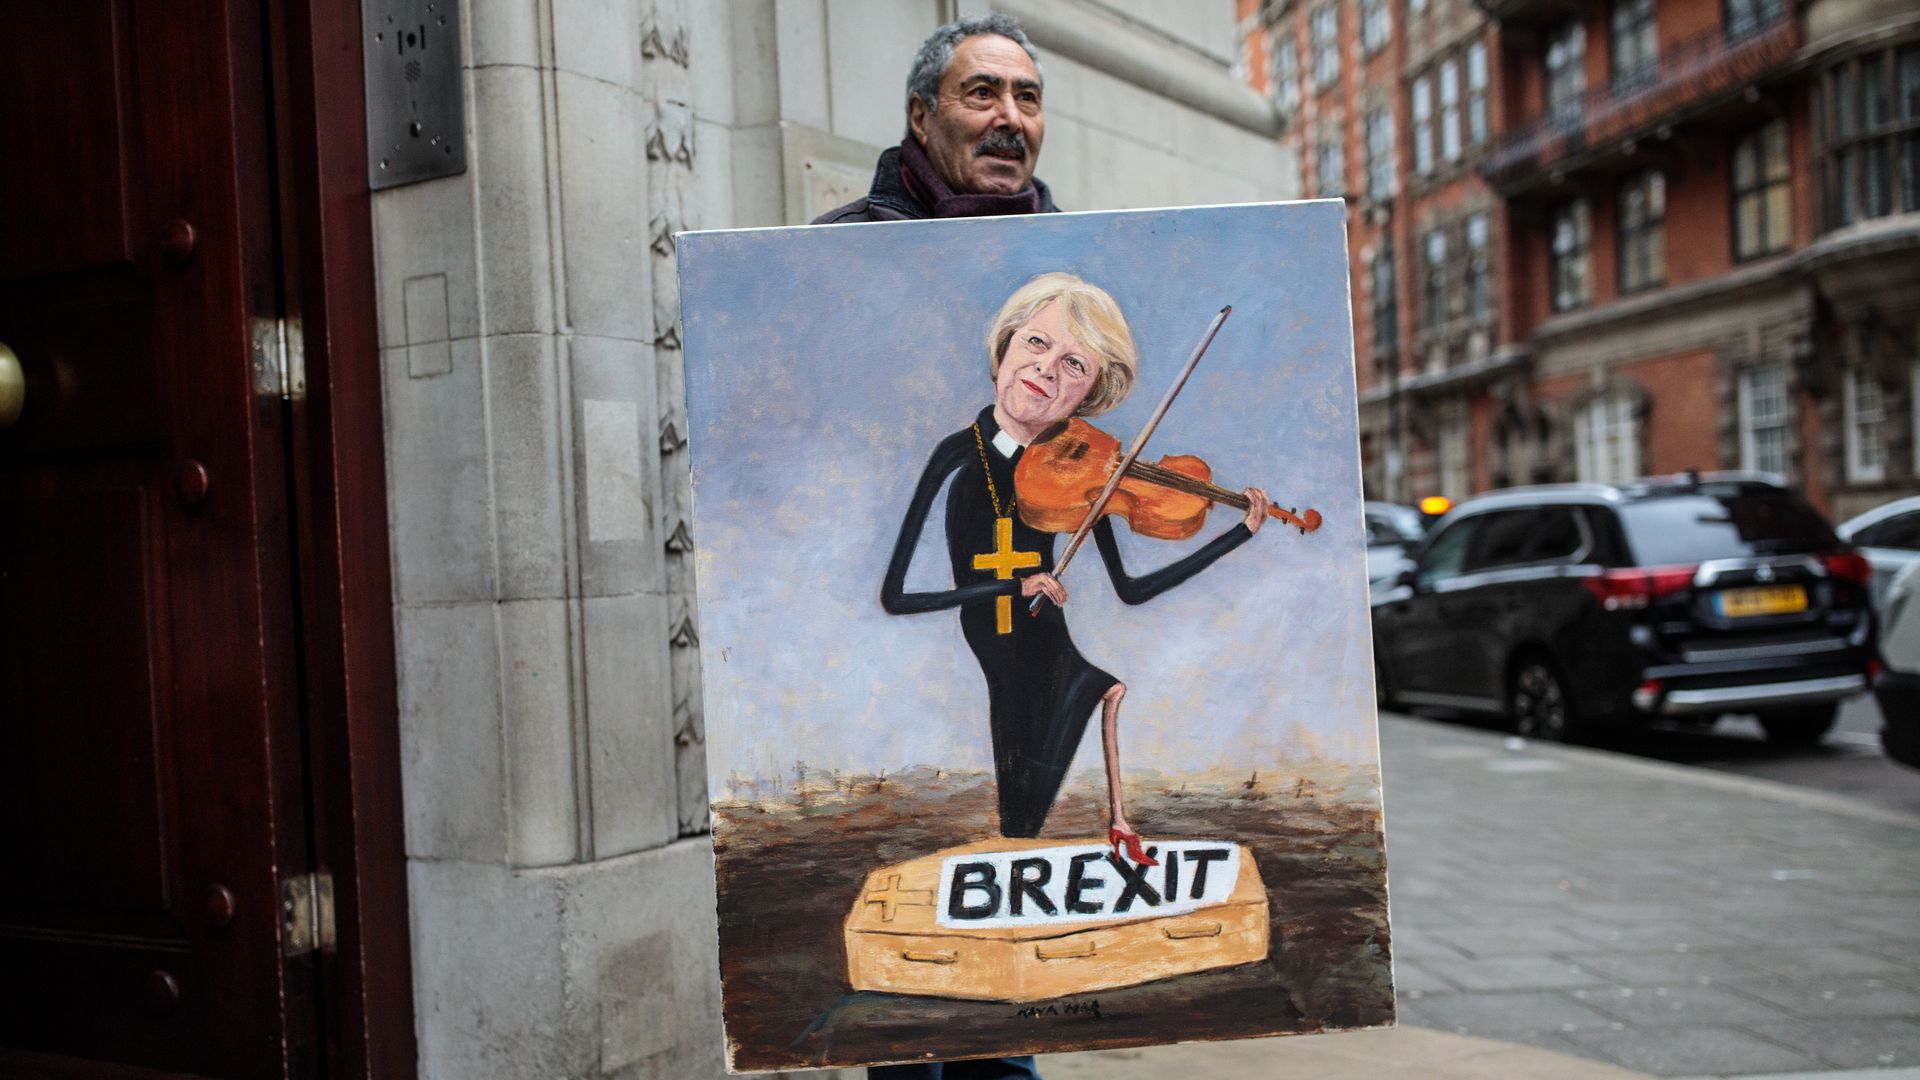 Political artist Kaya Mar stands with his painting depicting Prime Minister Theresa May playing a violin outside Millbank Studios in Westminster on January 16, 2019 in London, England. 